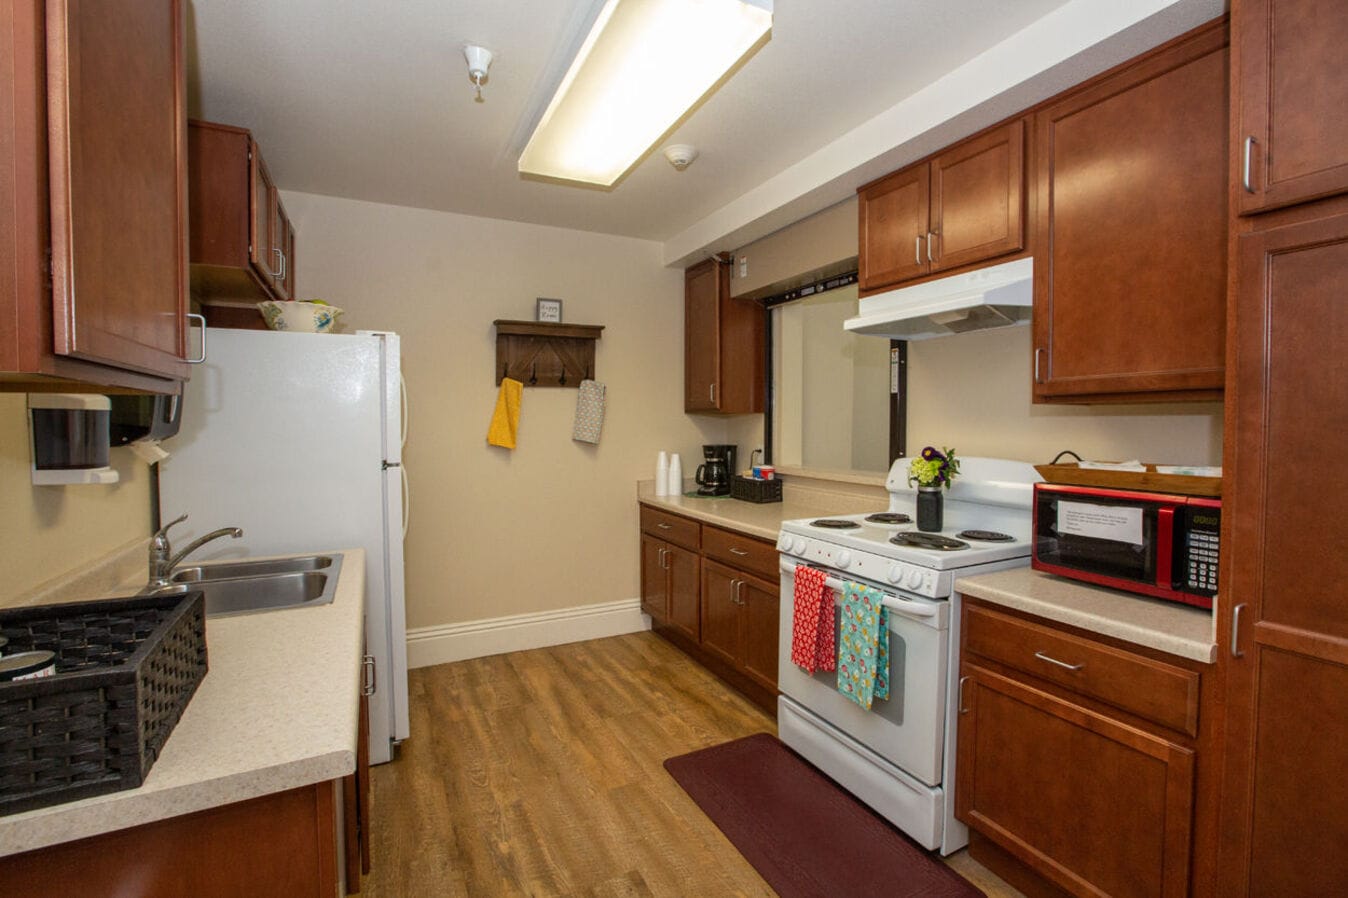 Larios Arms Senior Residence - Winnemucca, NV, US, income based apartments